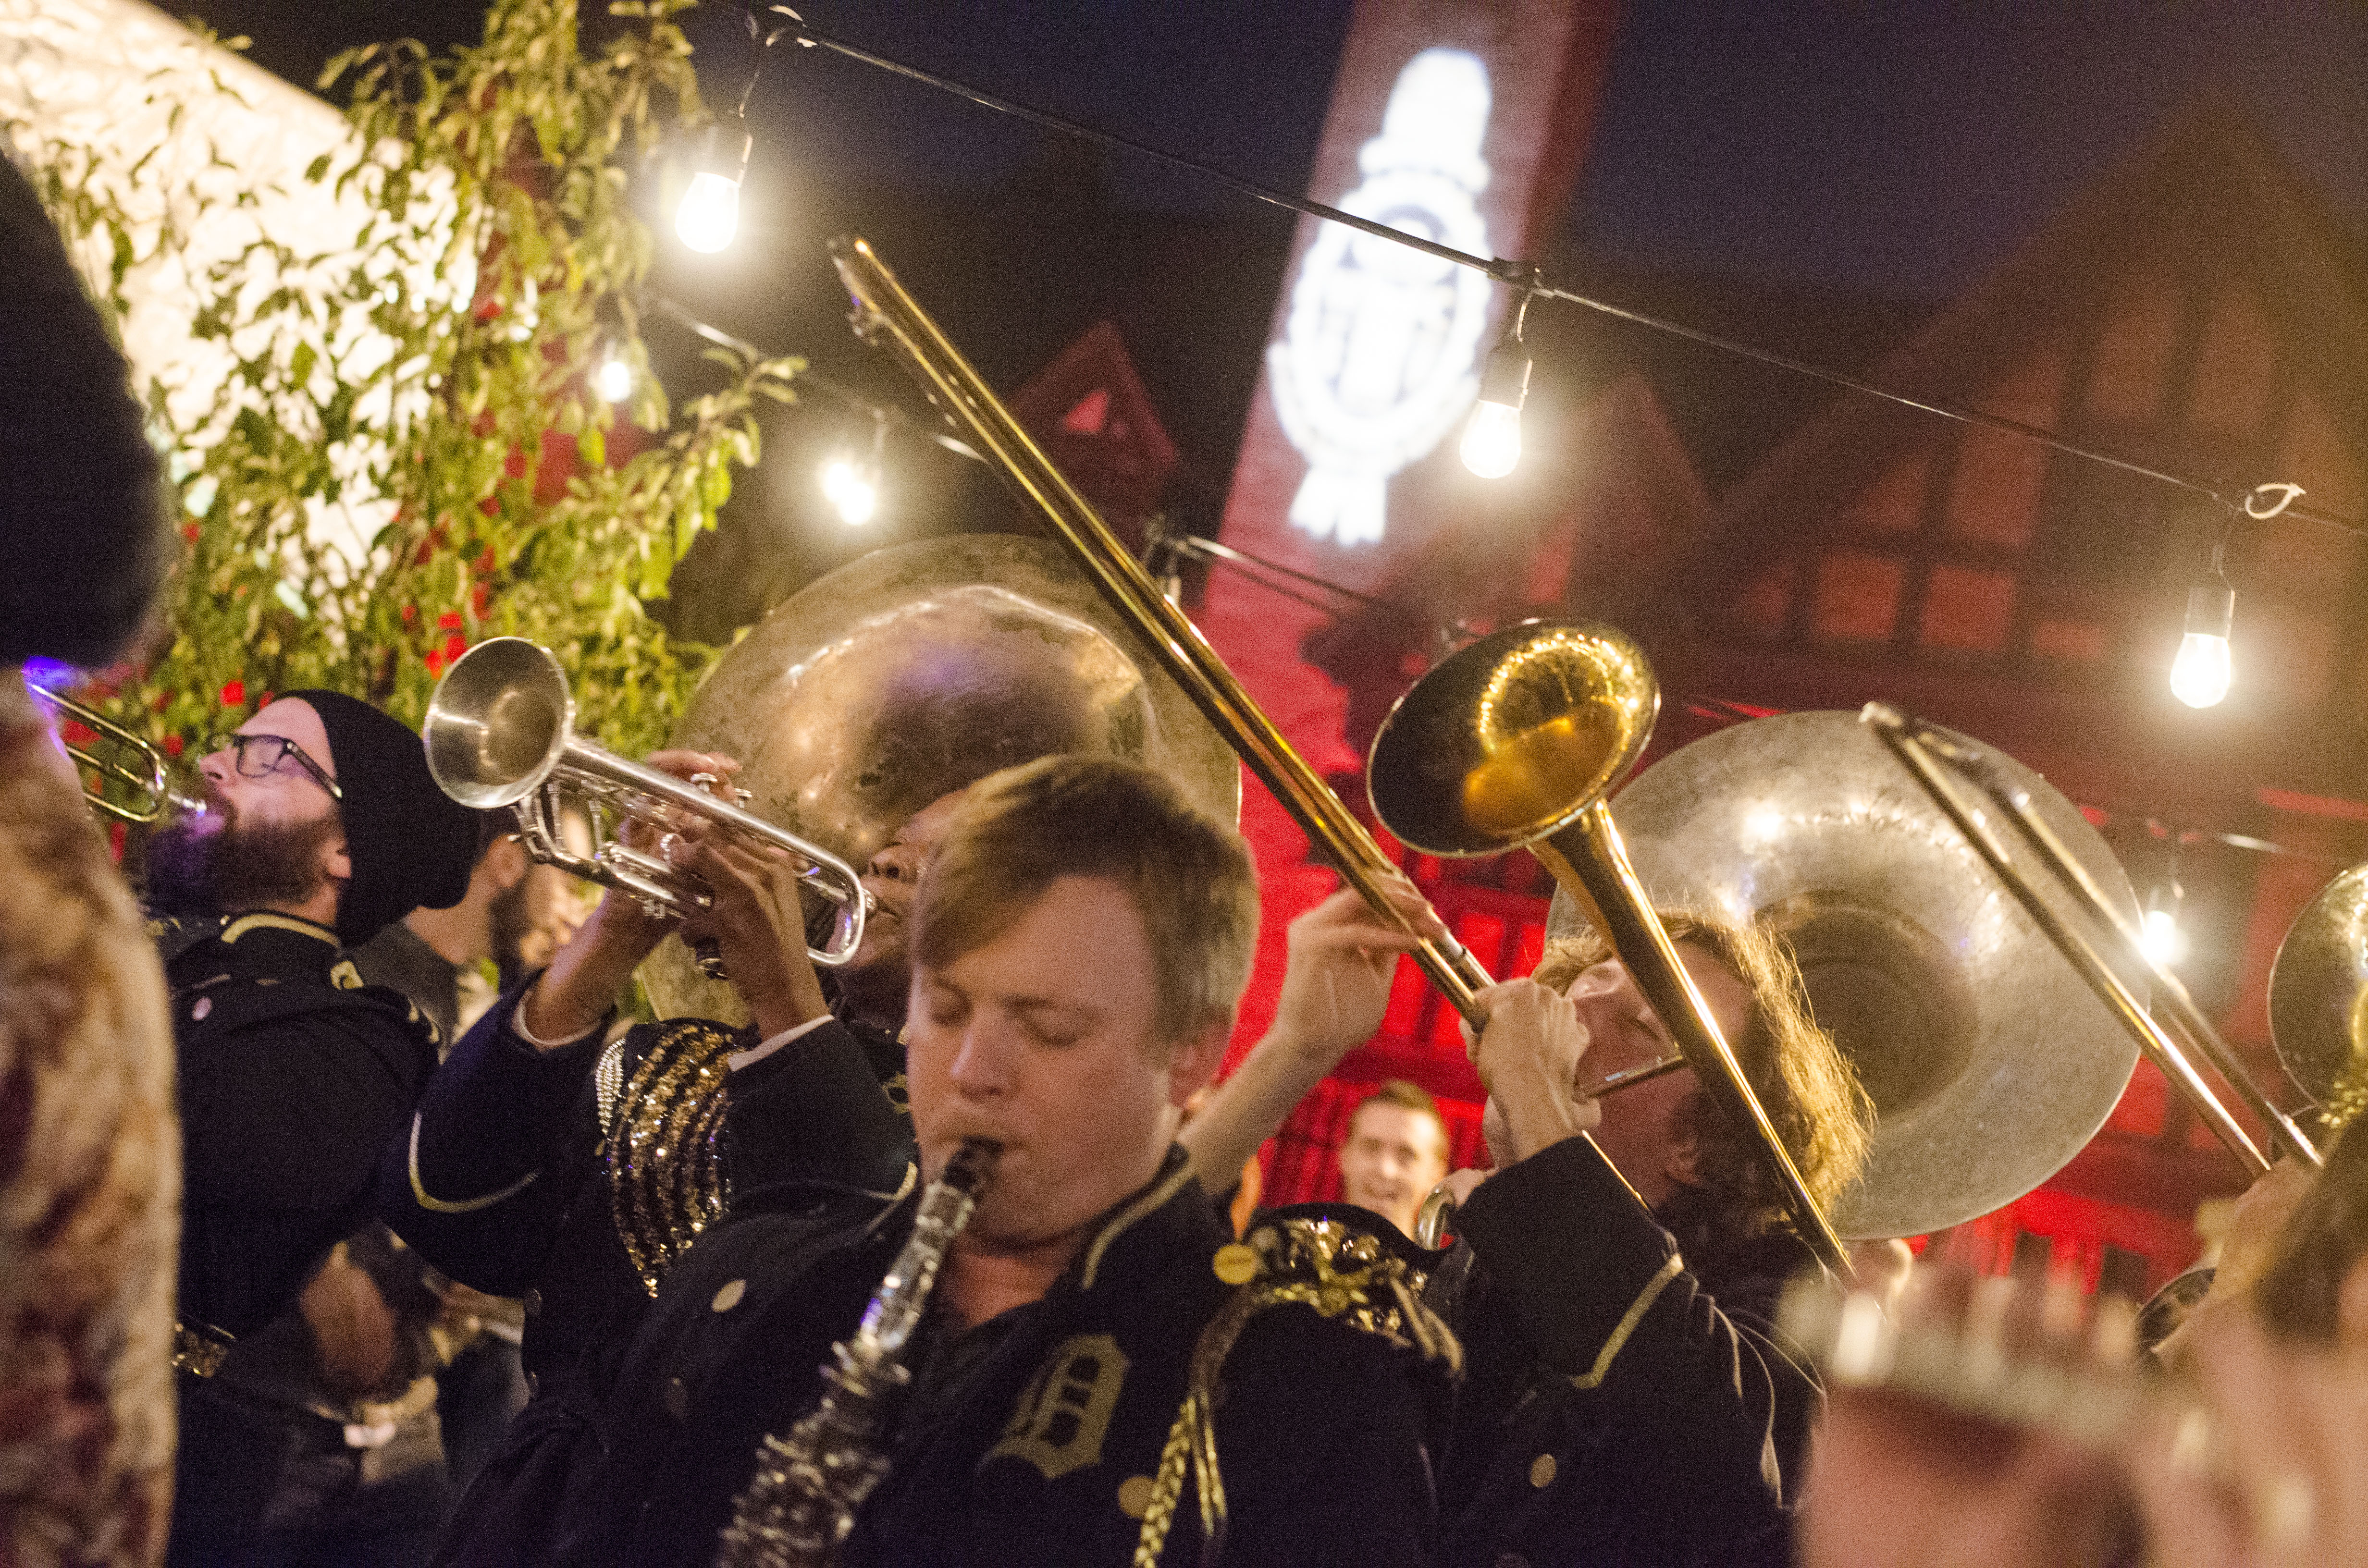 The Detroit Party Marching Band performing at the Windsor Craft Beer Festival.